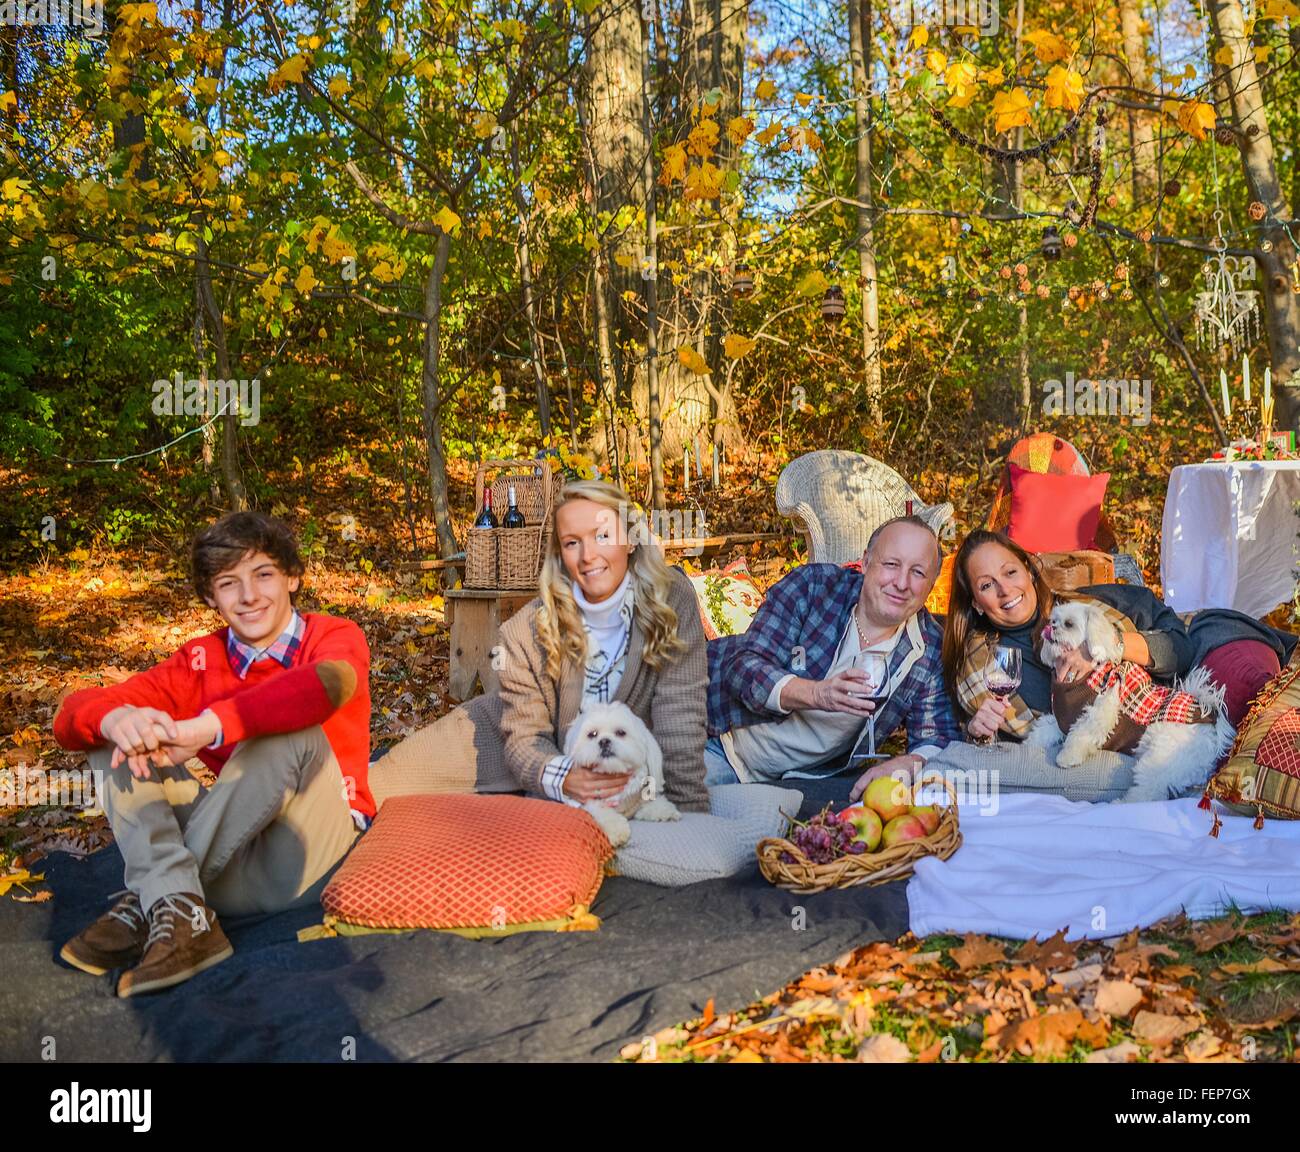 Portrait of mature couple with dogs, teenage and adult children relaxing on picnic blanket in woods Stock Photo